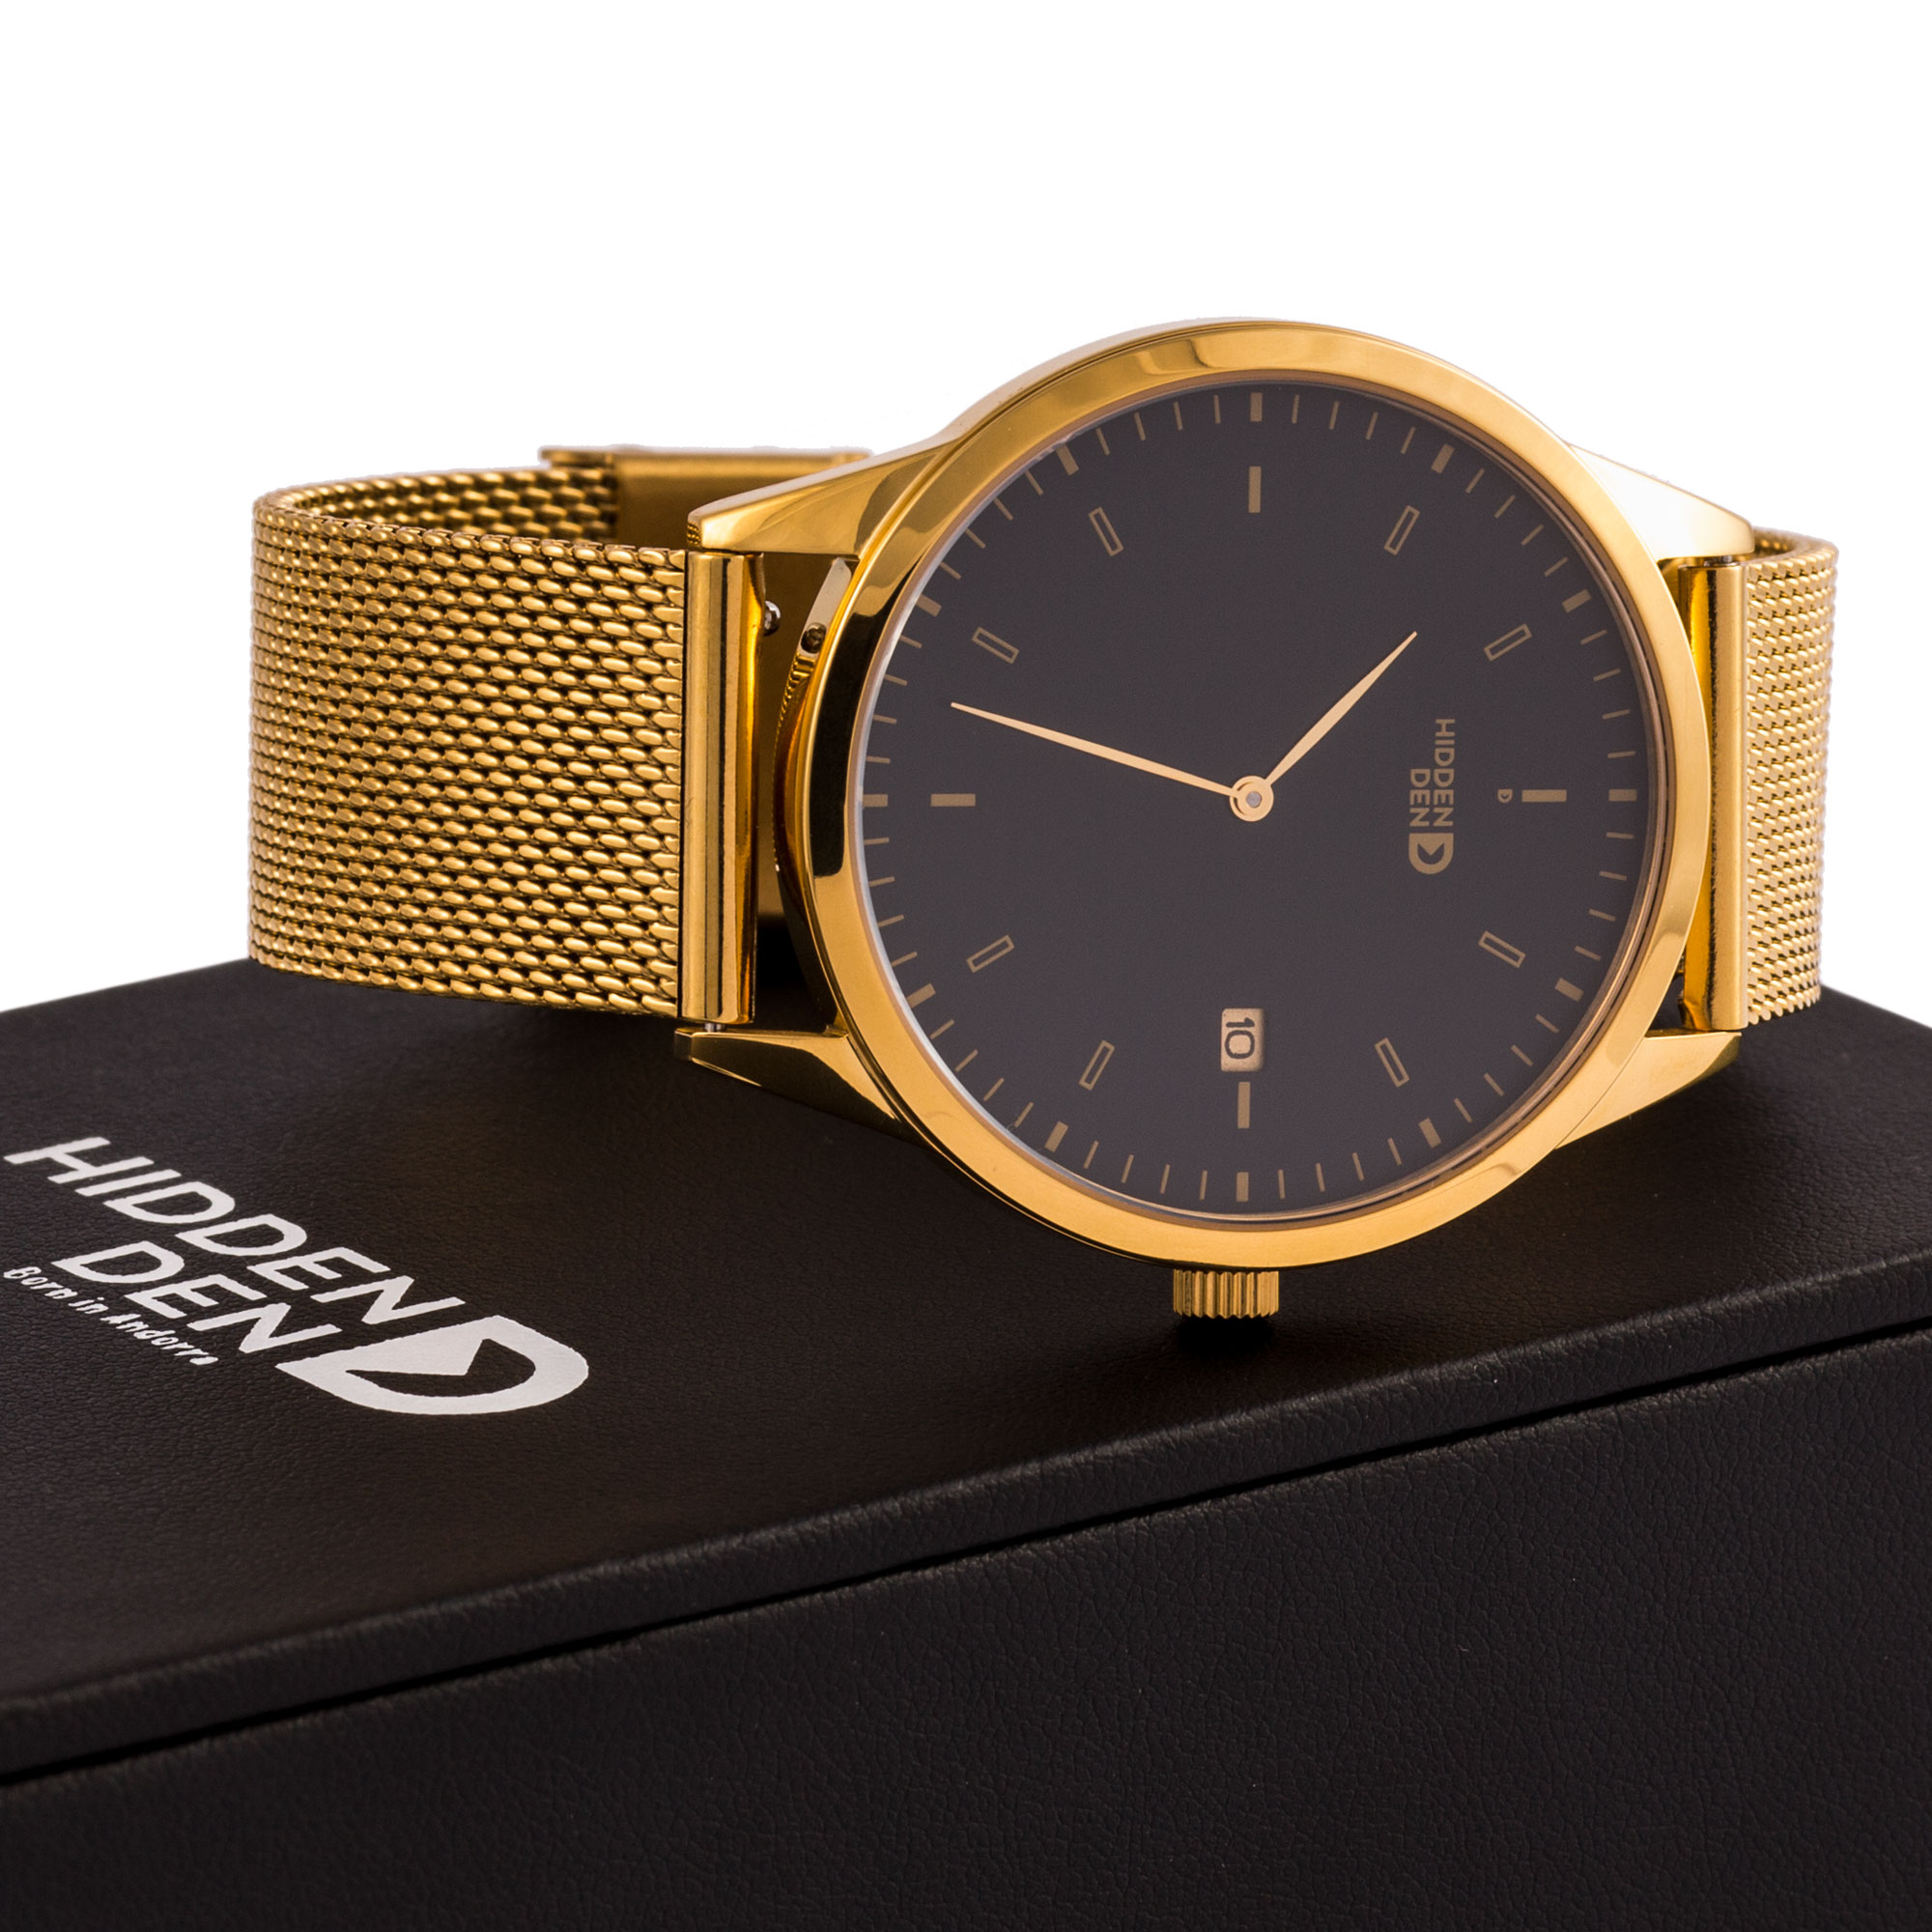 Tor Full Gold - Man and woman watch